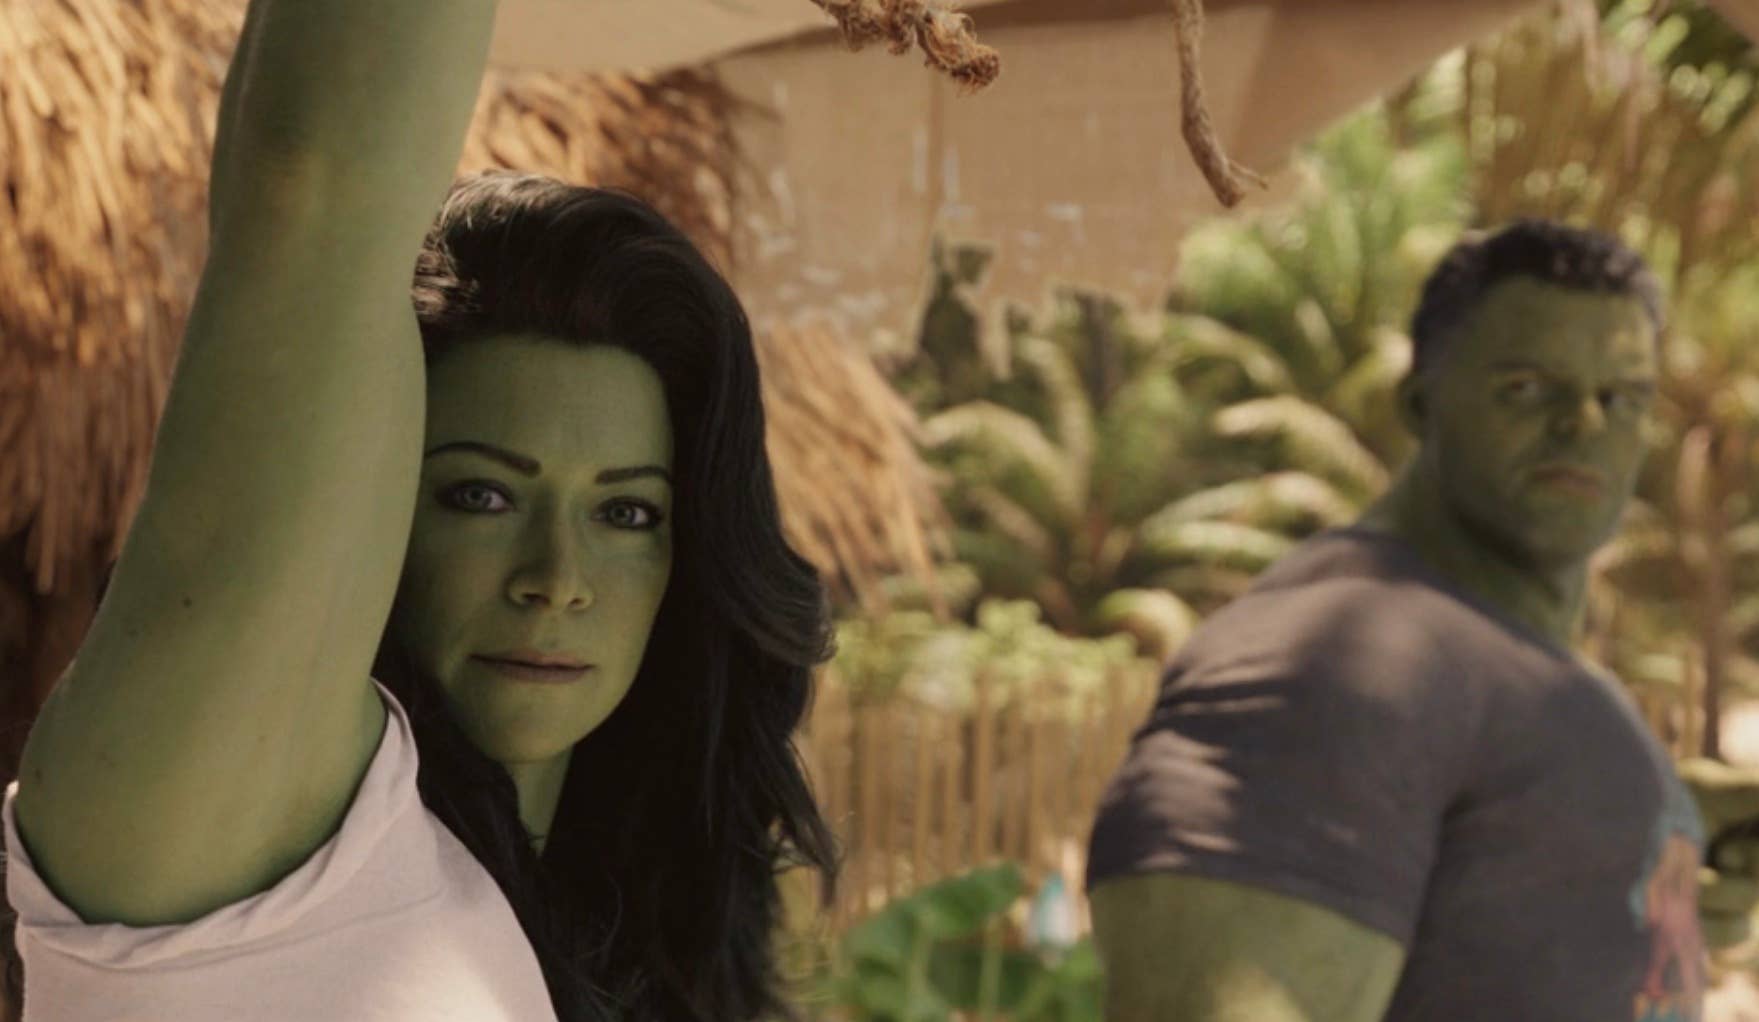 Everything We Know About Marvel's She-Hulk Series So Far